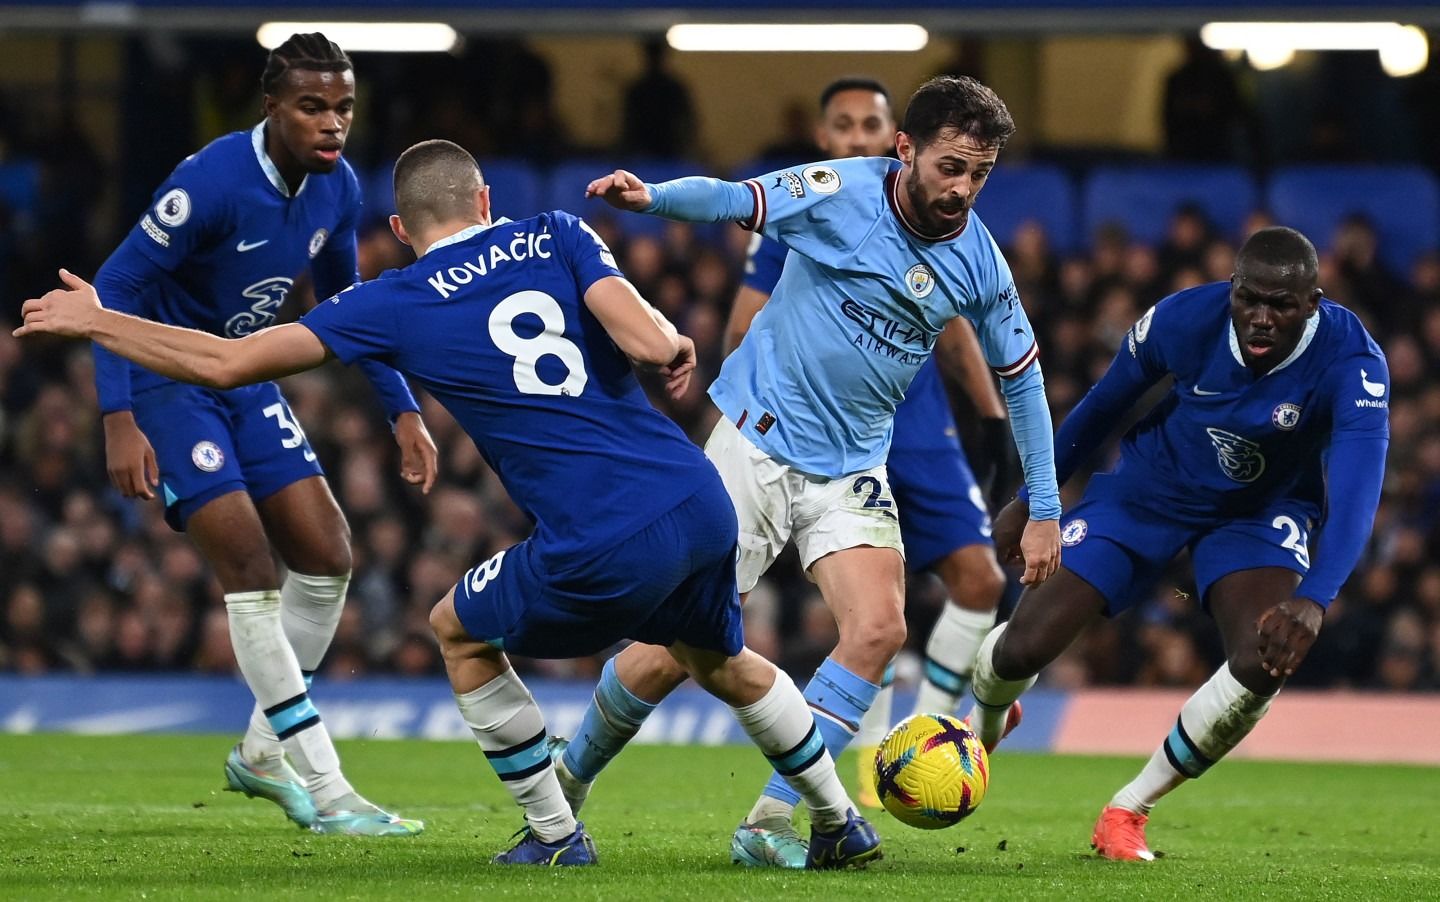 Chelsea And Man City At Risk Of Exiting Premier League Over Financial Violations